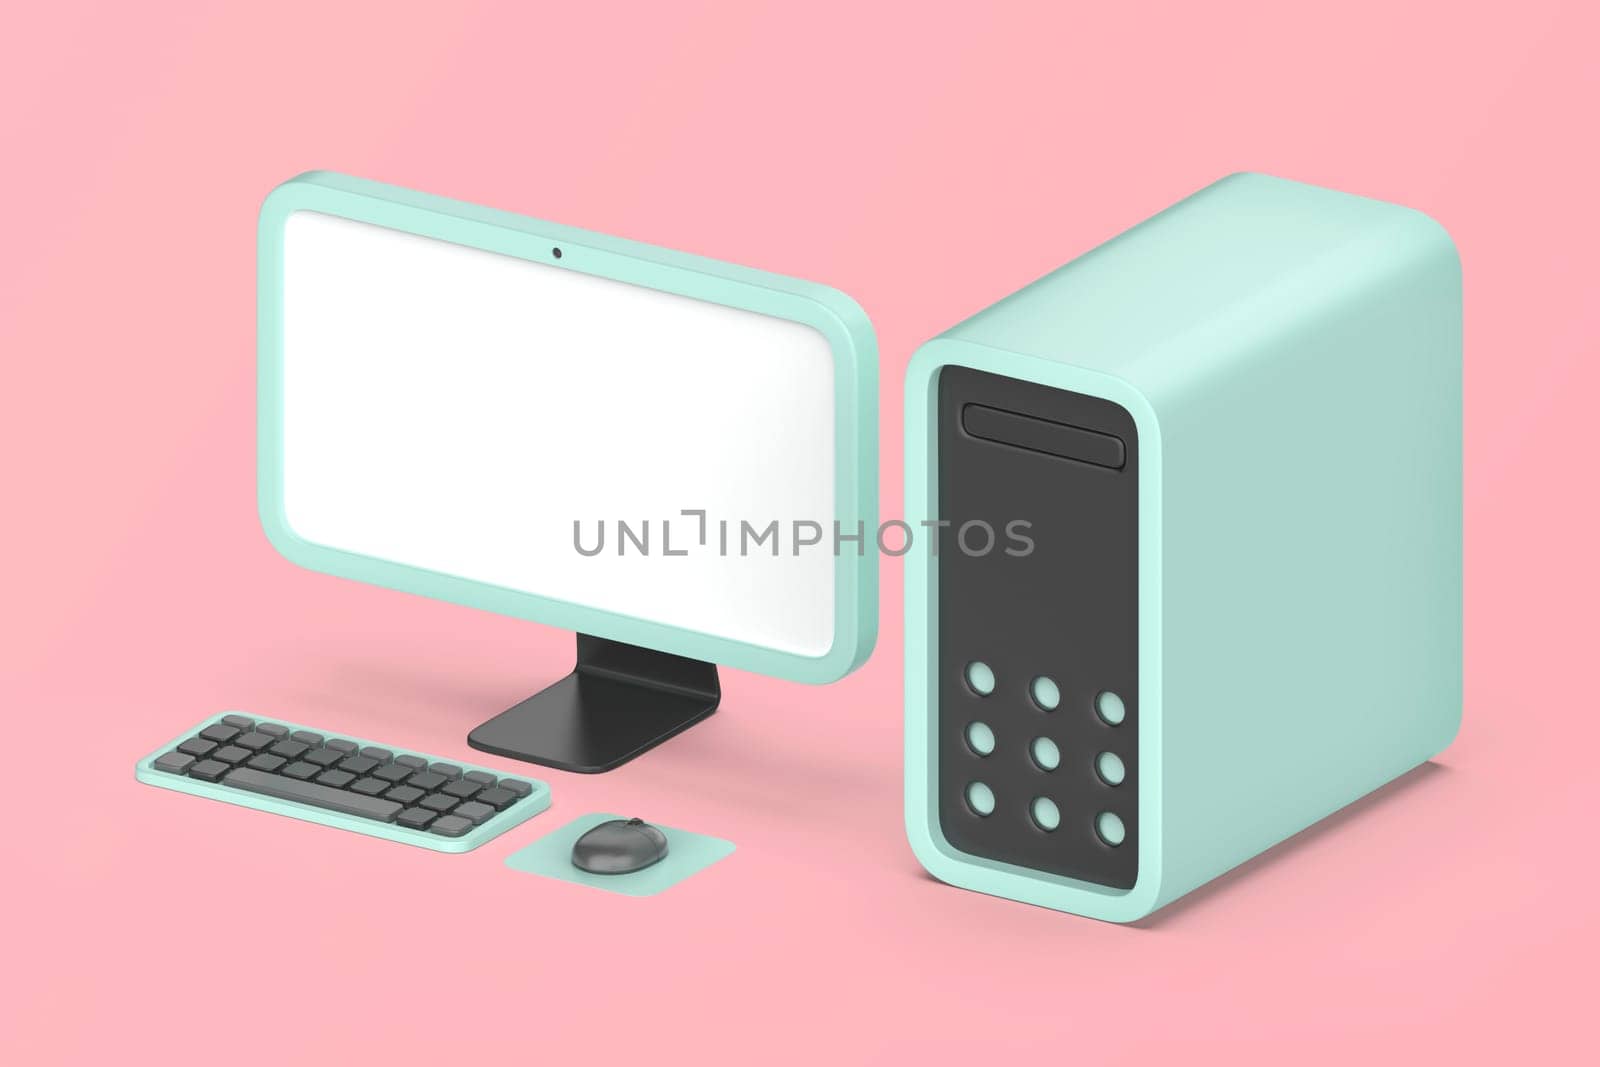 Simple desktop computer with monitor, wireless keyboard and mouse on pink background